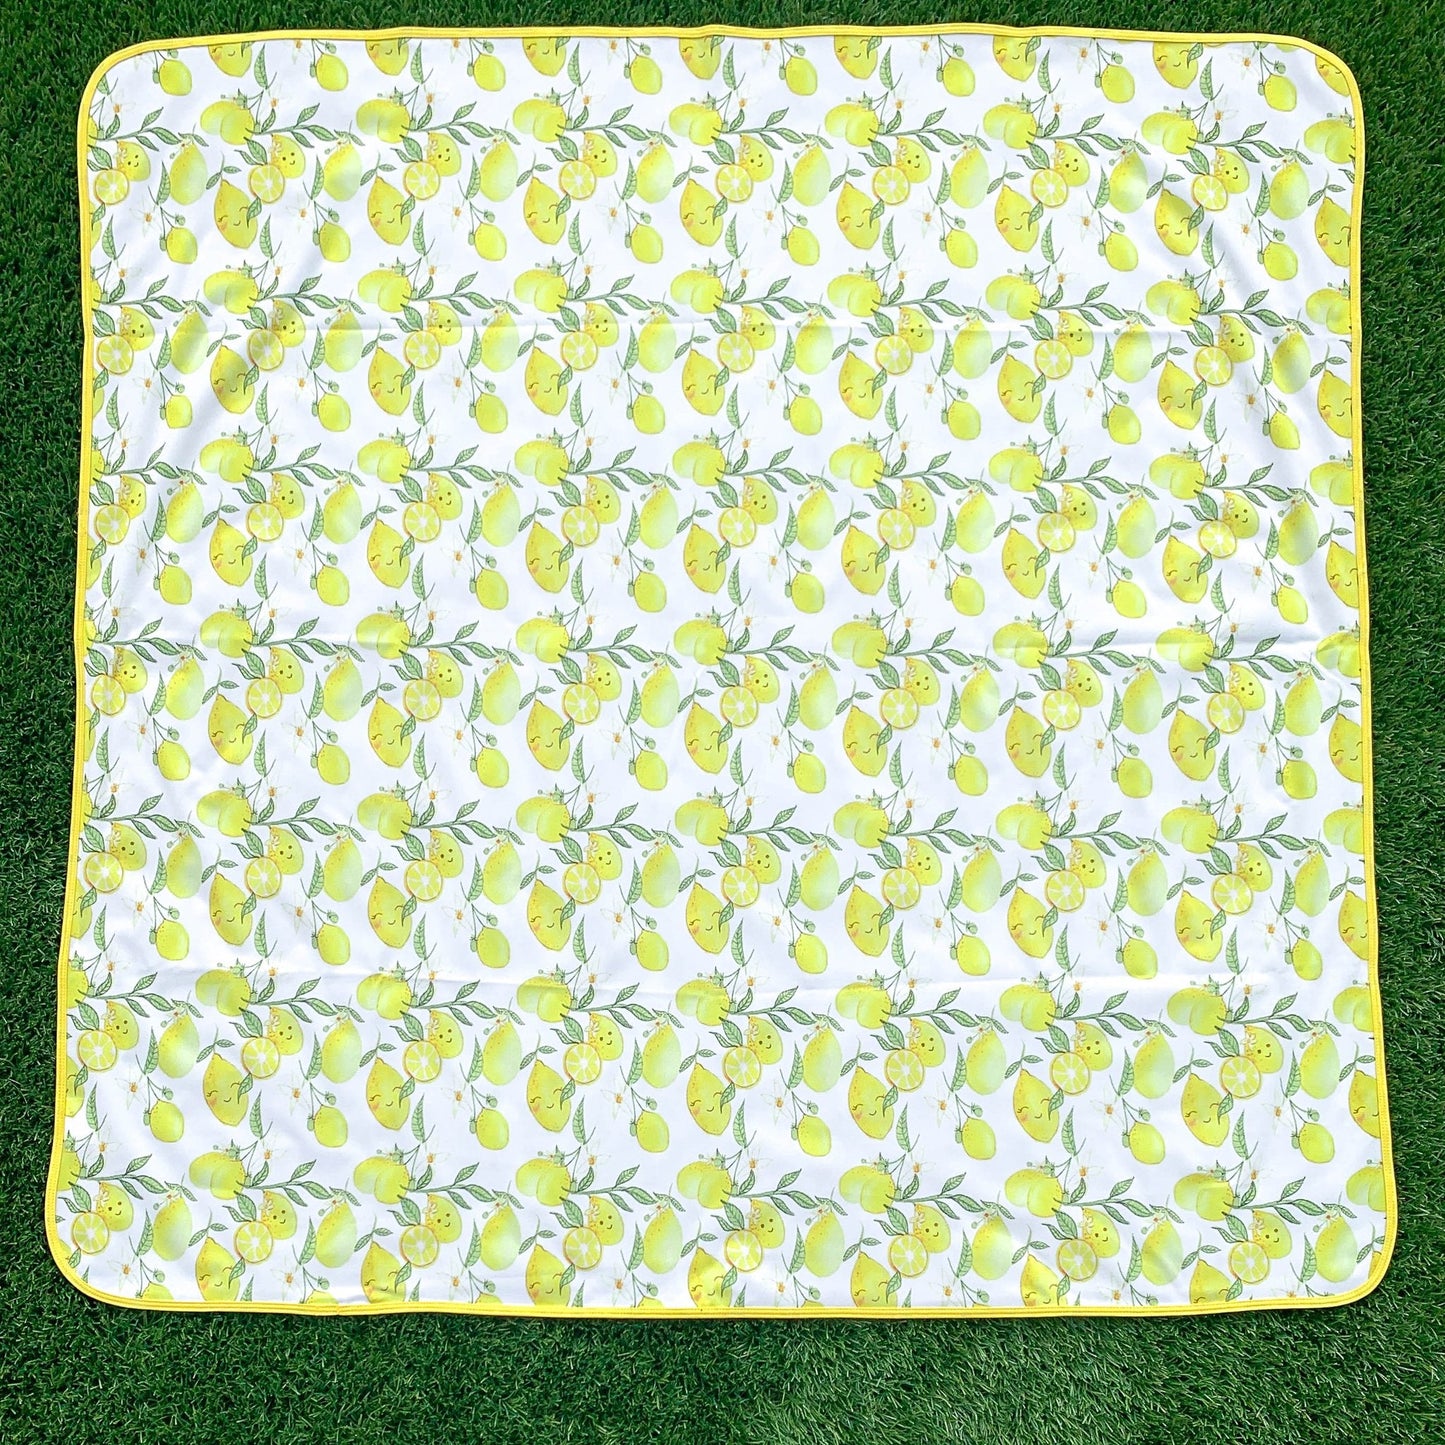 Fresh Squeezed Lemon Splash Mat - A Waterproof Catch-All for Highchair Spills and More! - WERONE